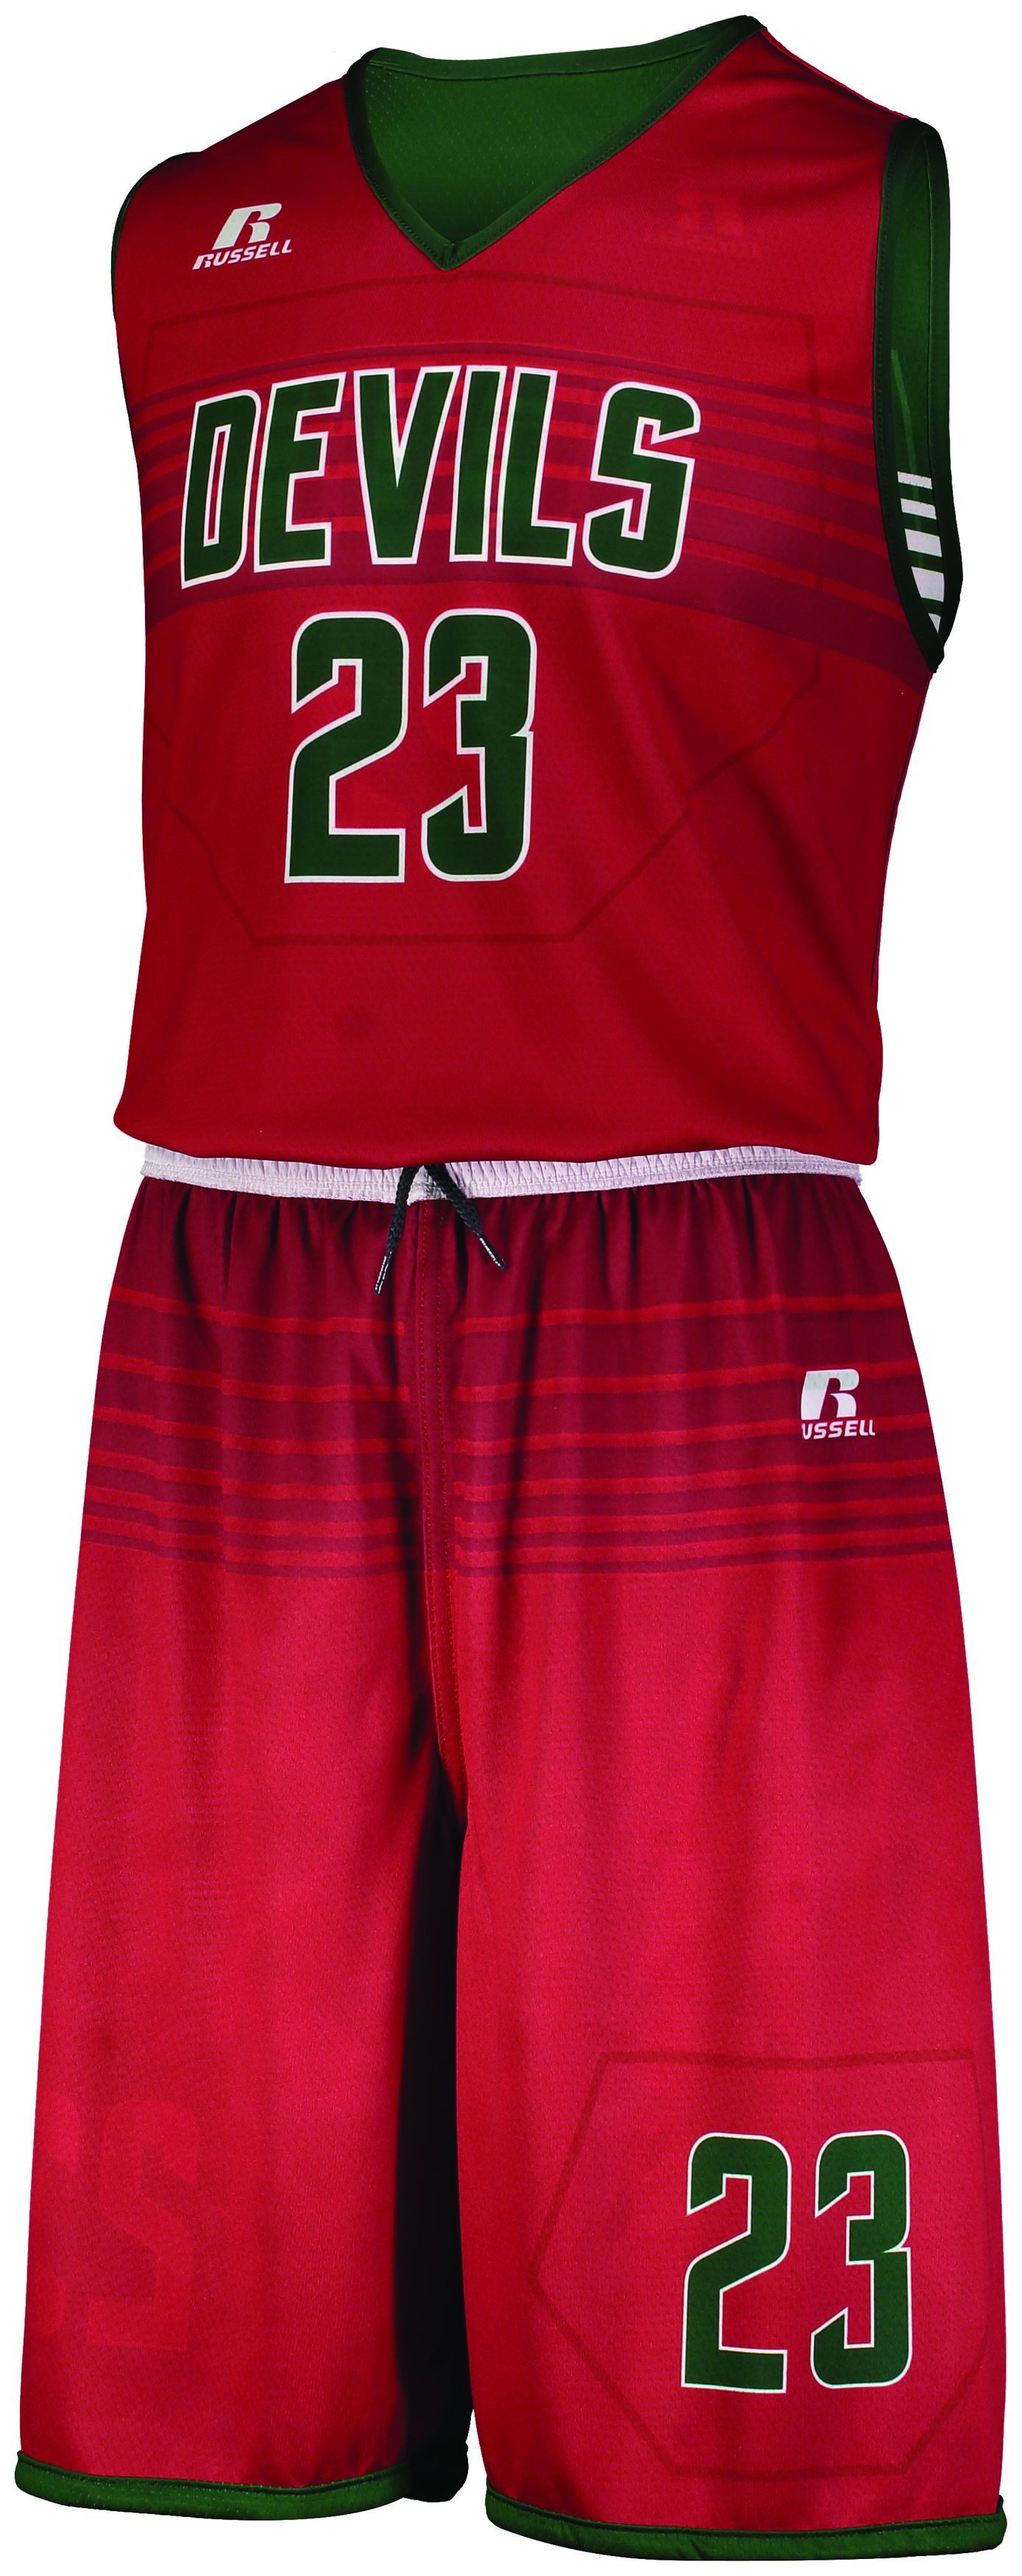 Russell Basketball Reversible Practice Jersey Youth